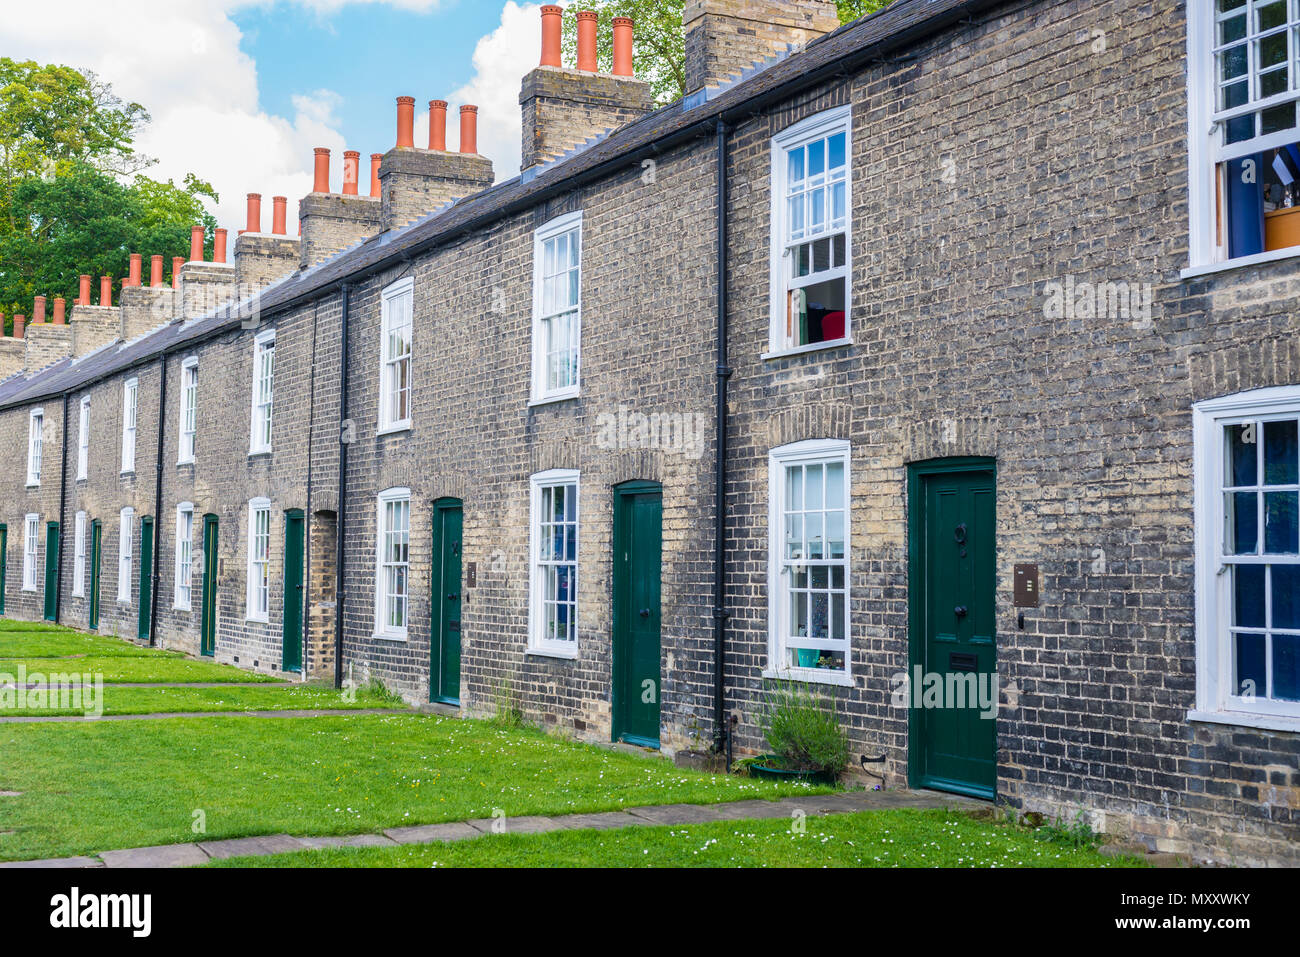 Row of restored Victorian brick houses with green colored doors on a local road in Cambridge, UK Stock Photo